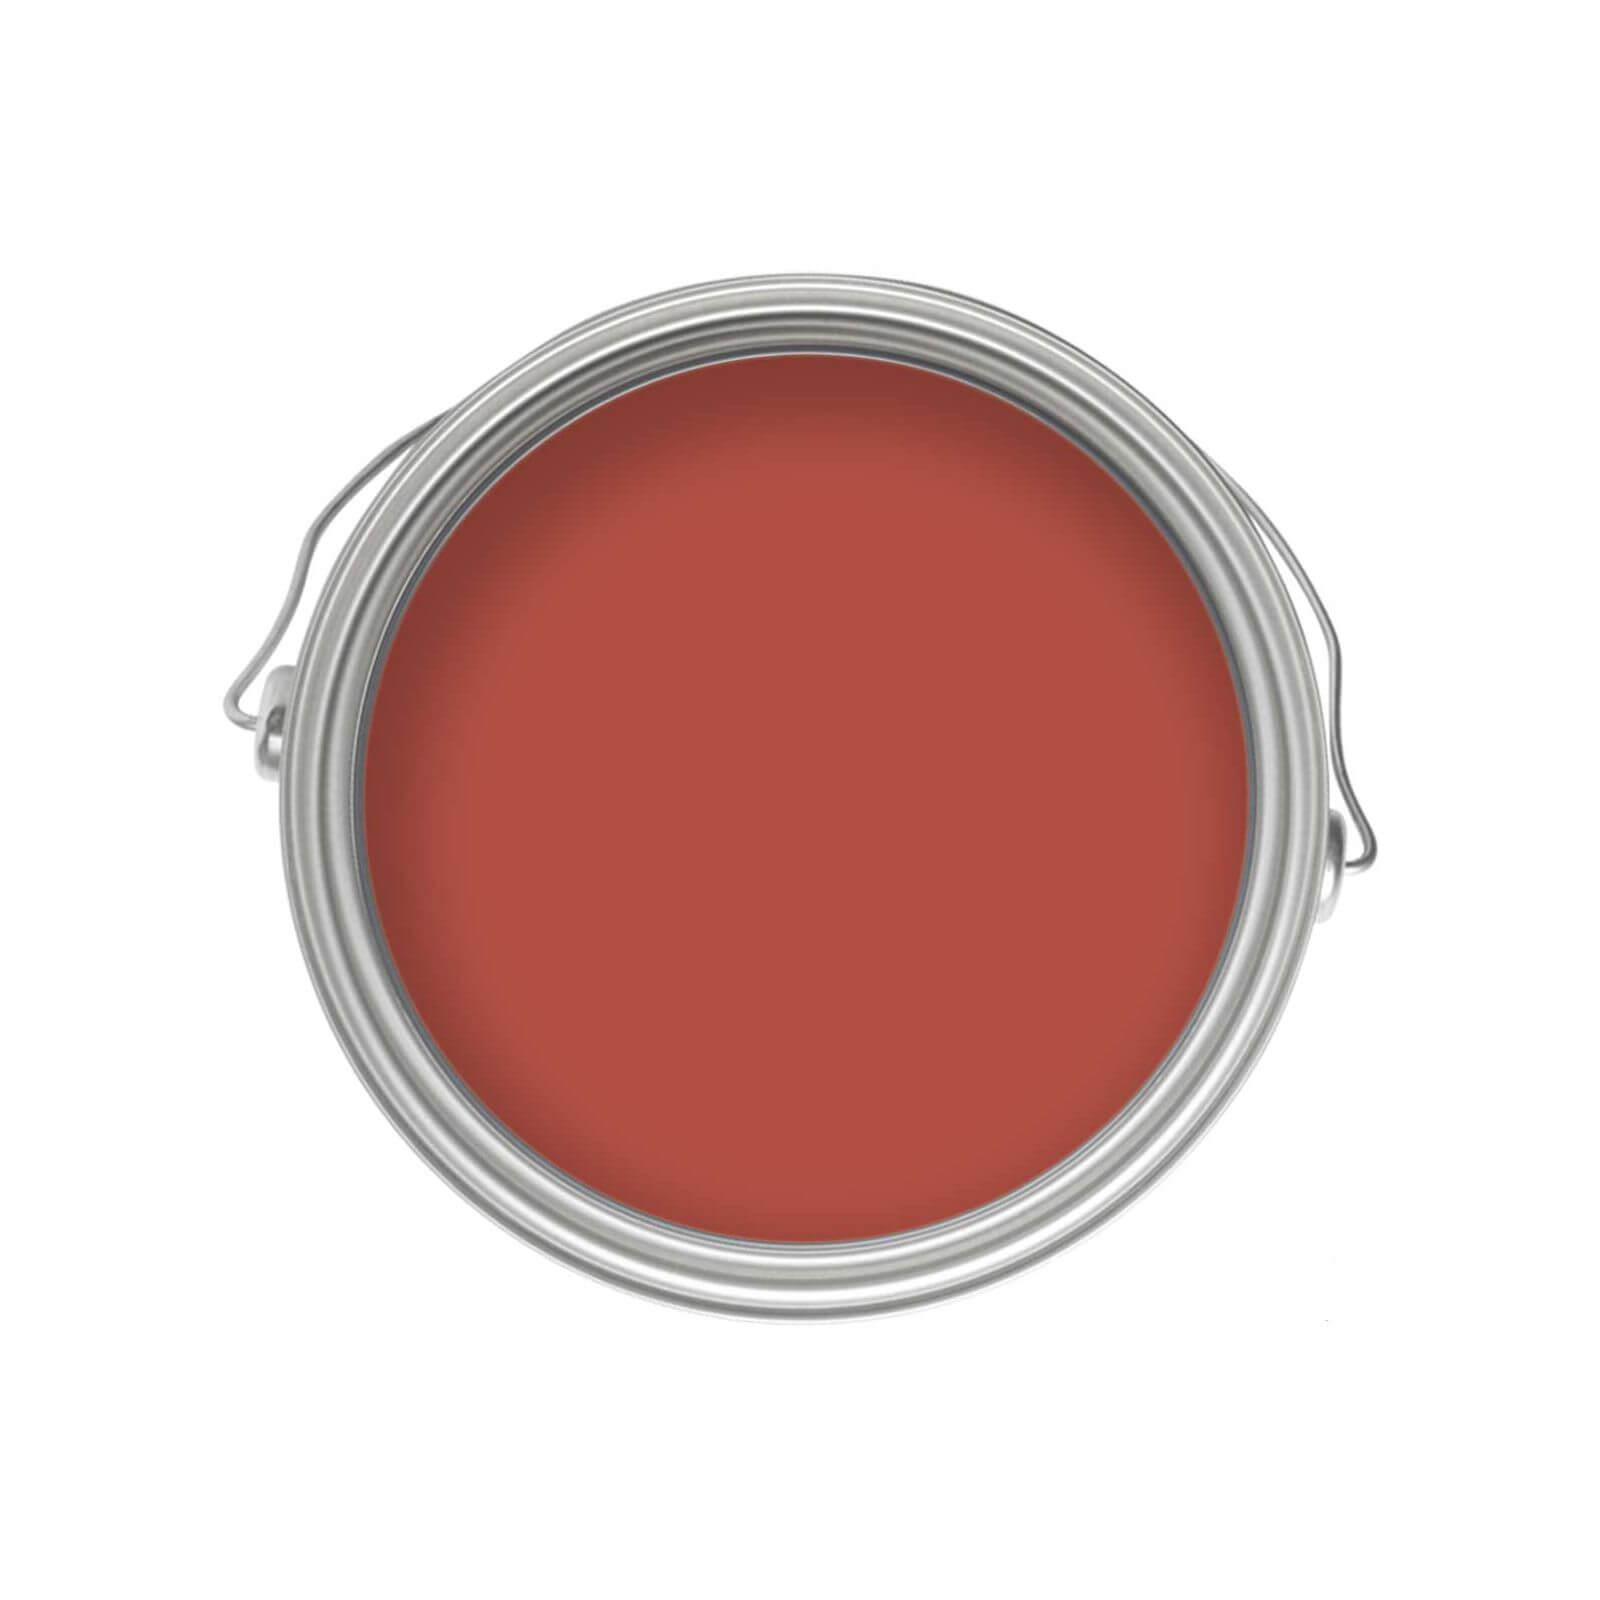 Photo of Craig & Rose 1829 Eggshell Paint - Oriental Red - 2.5l